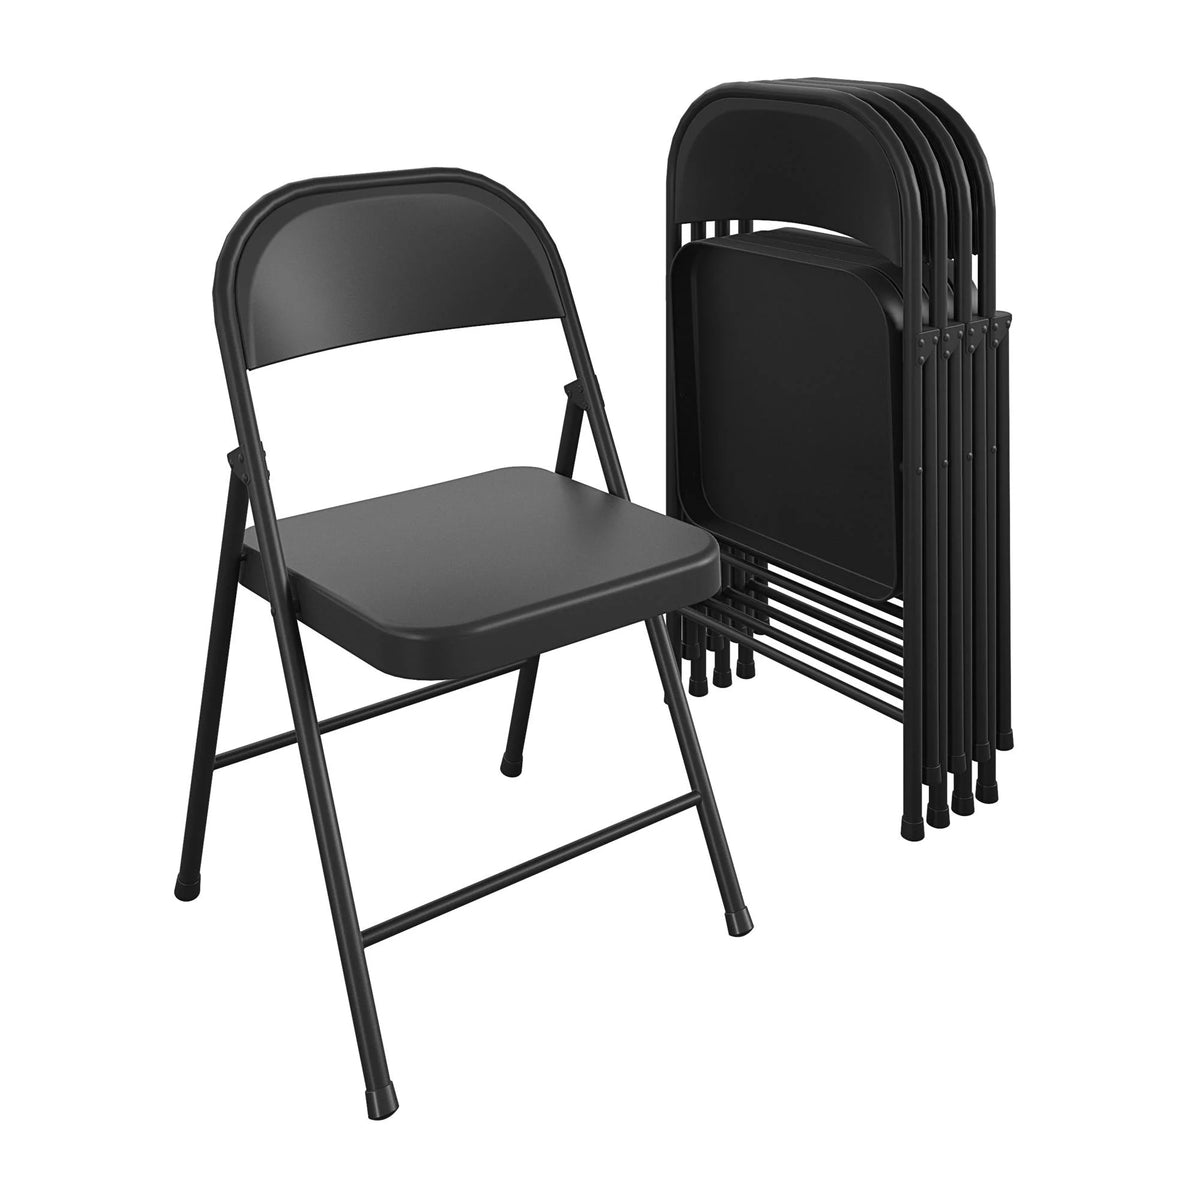 SmartFold All-Steel Folding Chairs, 4-Pack, Black